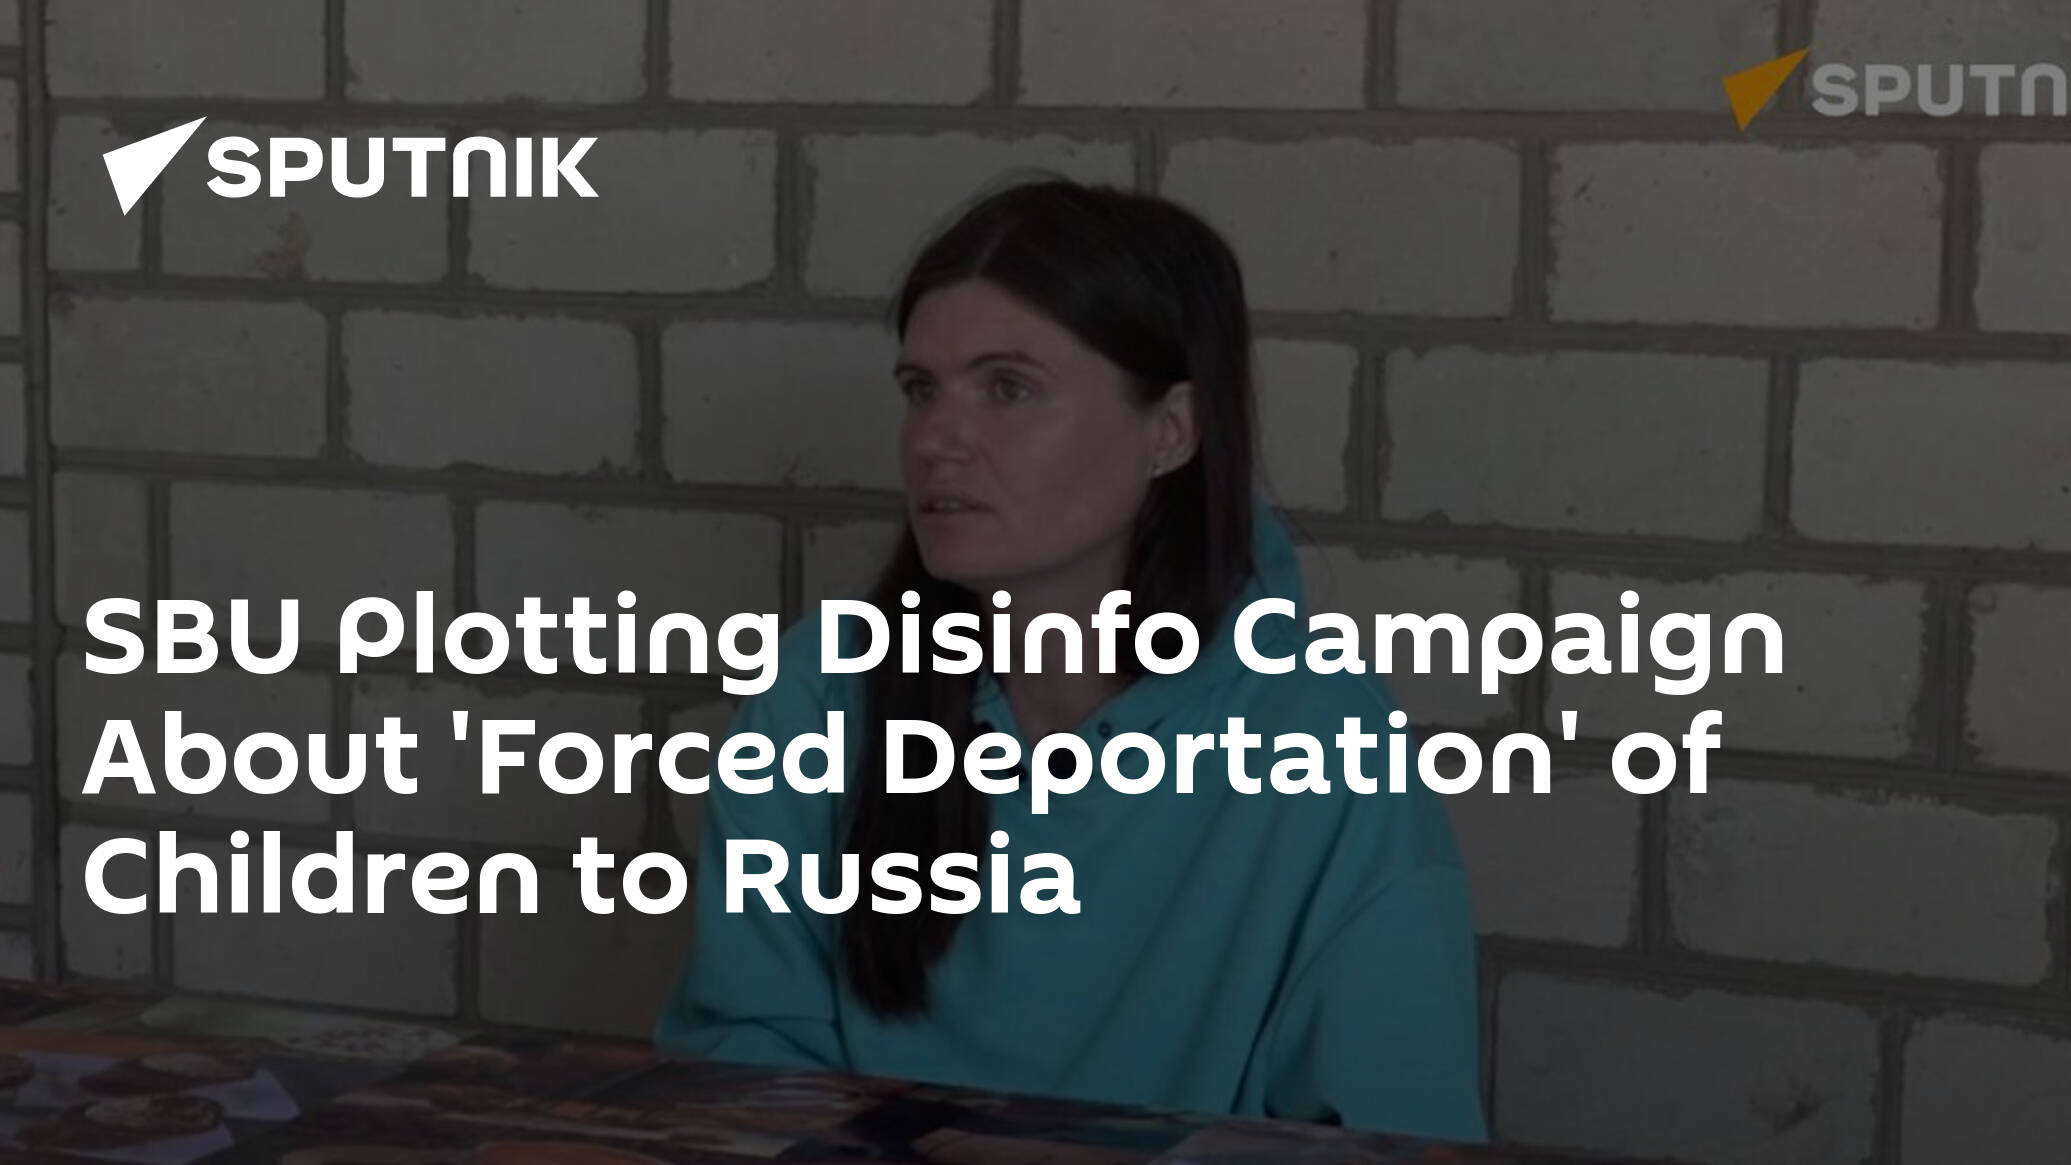 SBU Plotting Disinfo Campaign About 'Forced Deportation' of Children to Russia